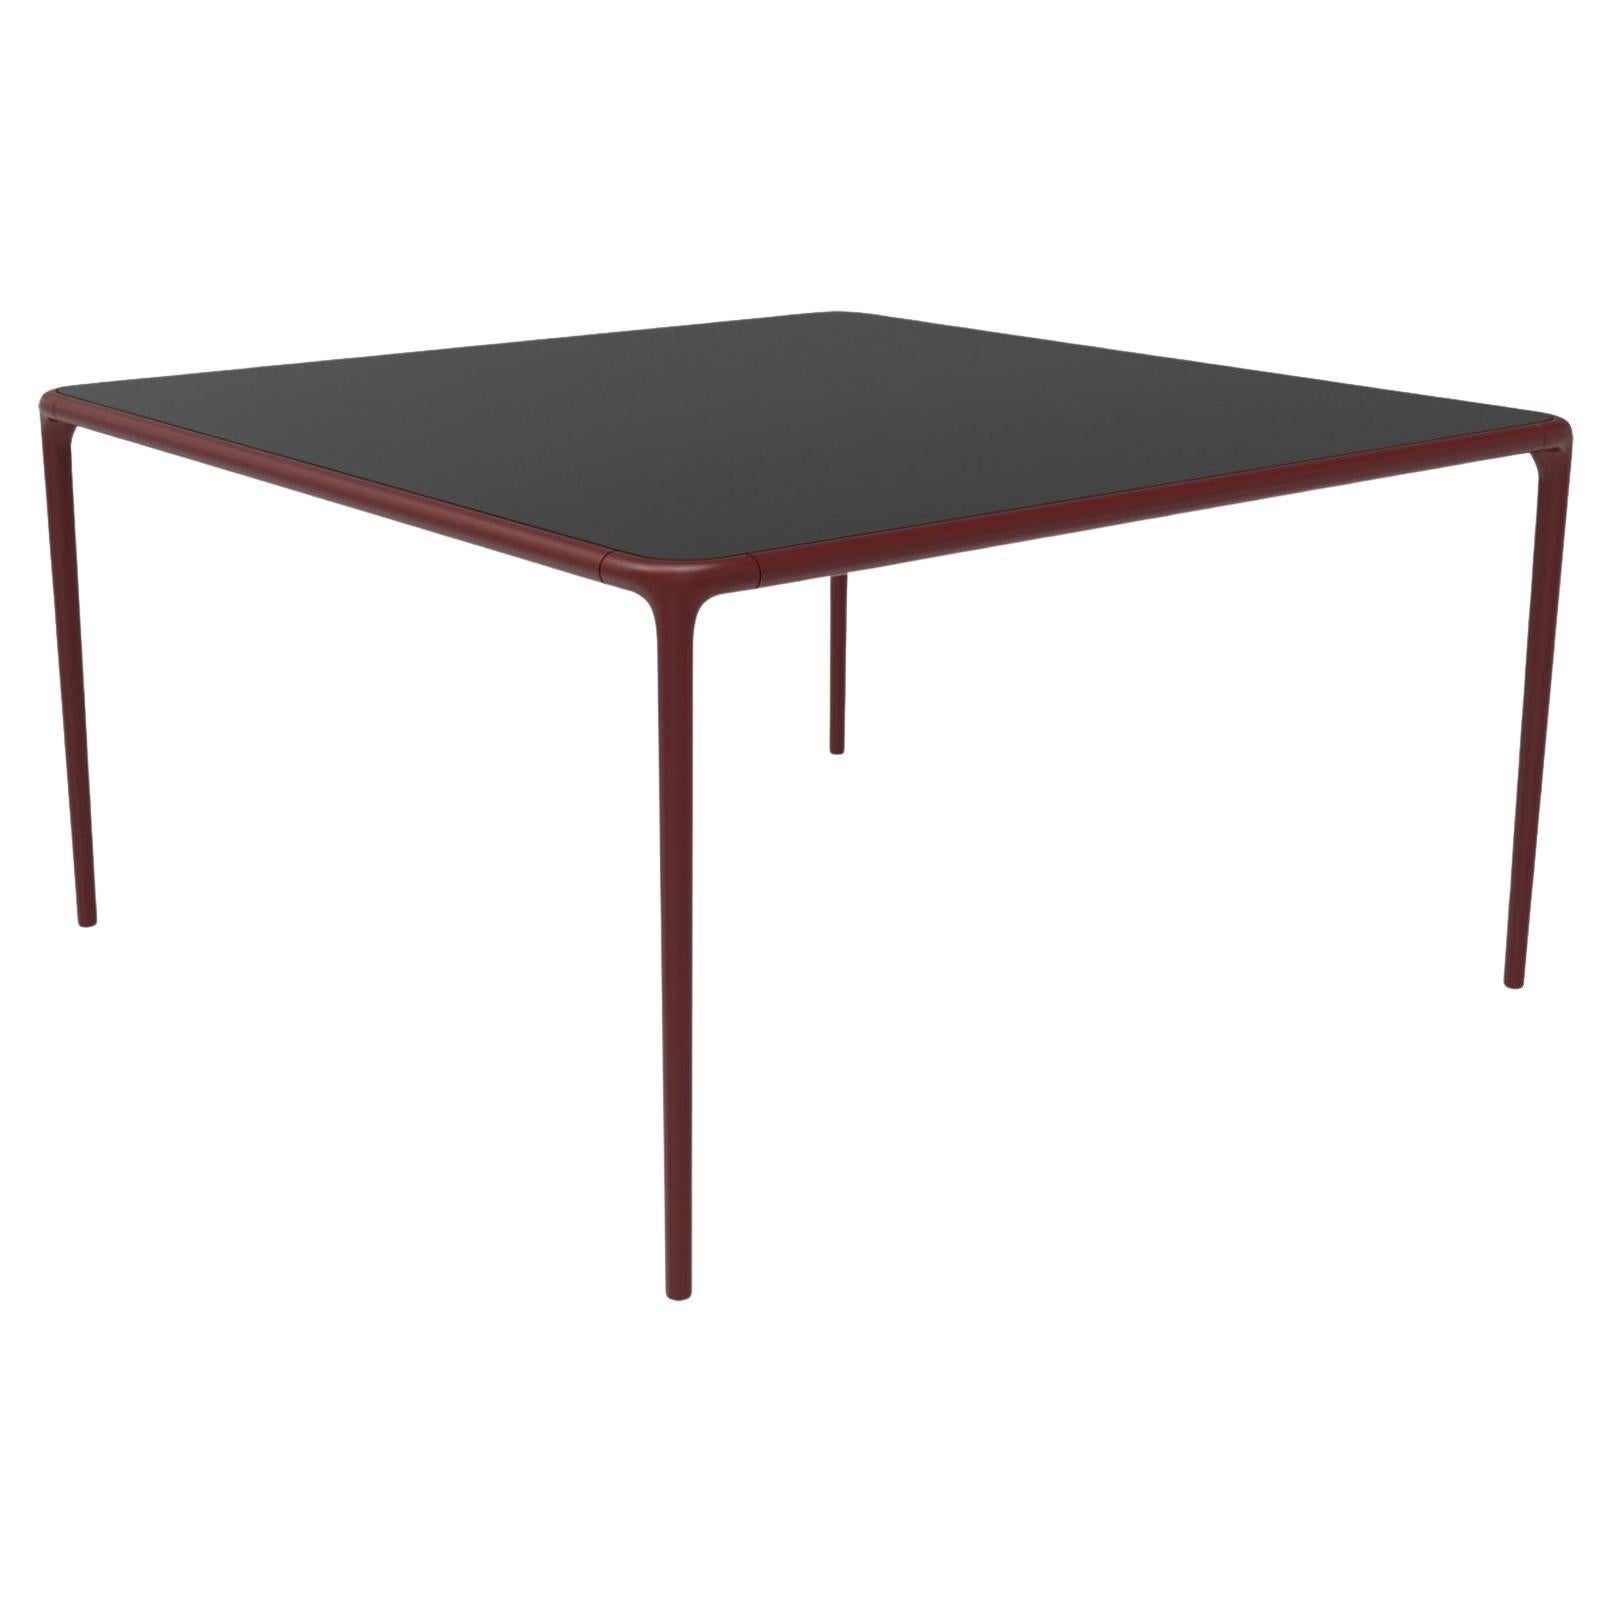 Xaloc Burgundy Glass Top Table 140 by Mowee For Sale